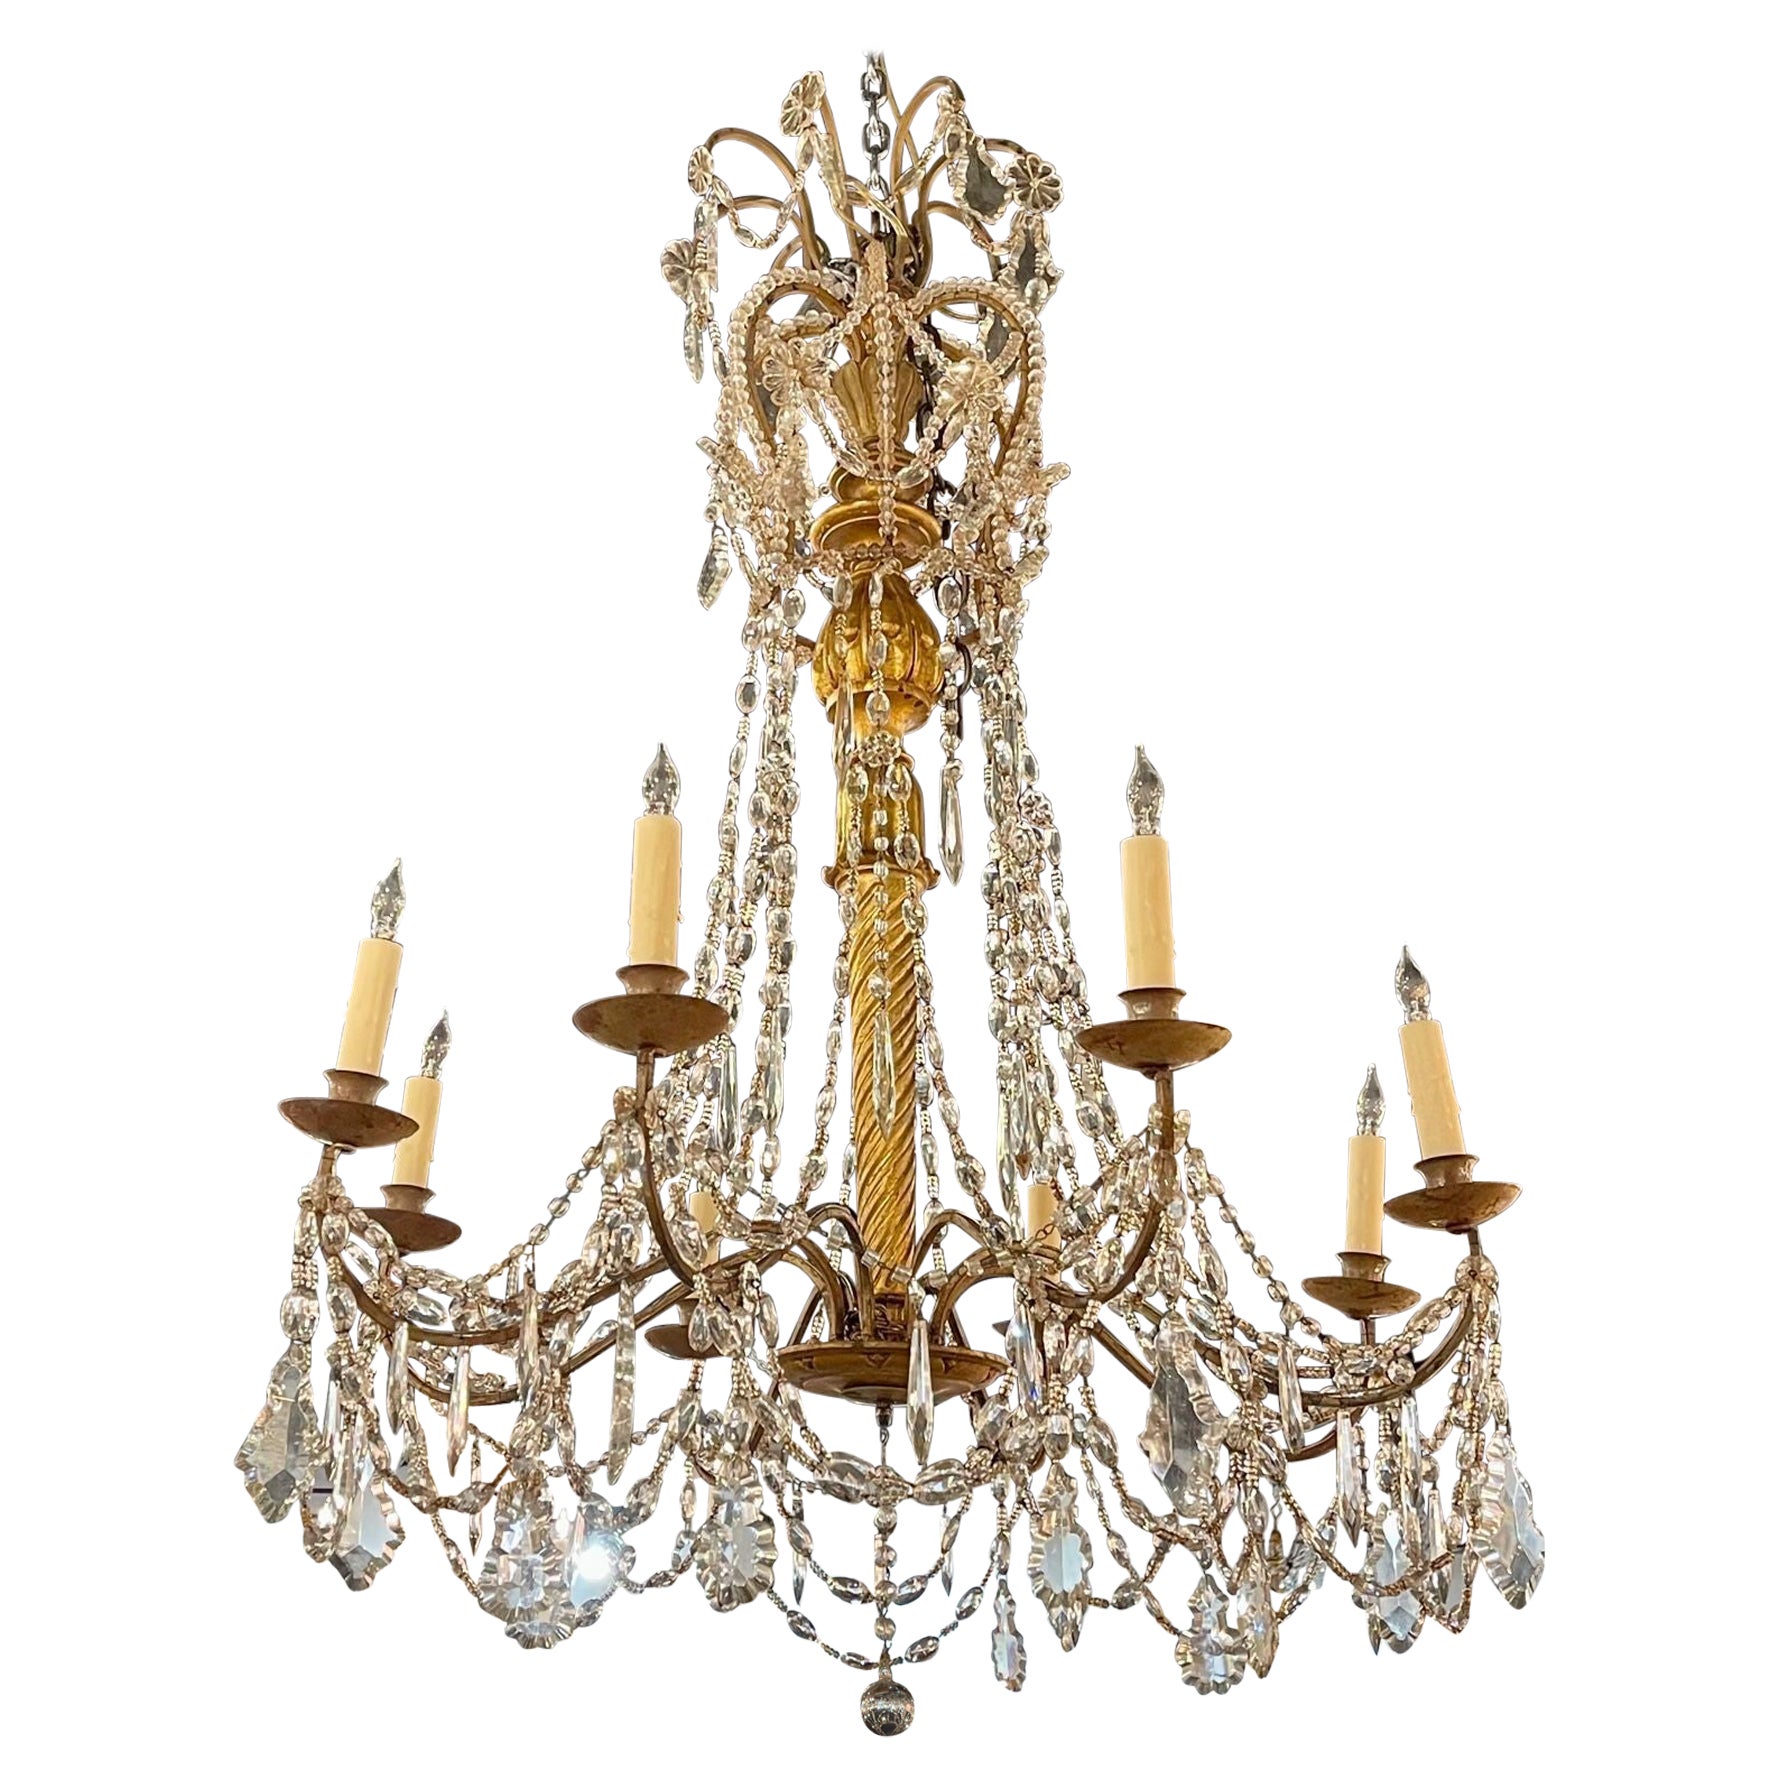 18th Century Italian Giltwood and Crystal 8 Light Chandelier